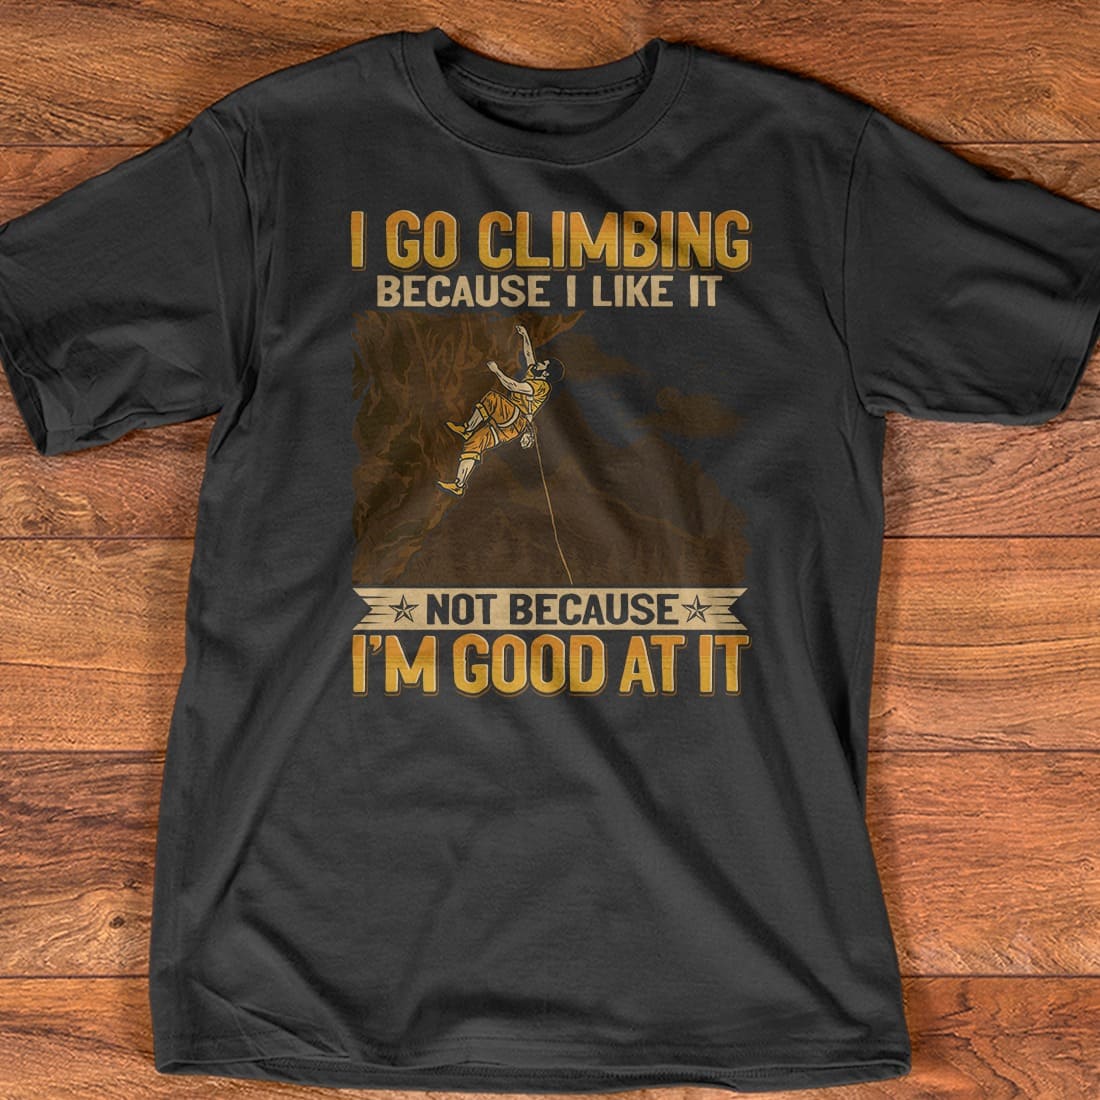 I go climbing because I like it not because I'm good at it - Gift for mountain climber, risky sport lover